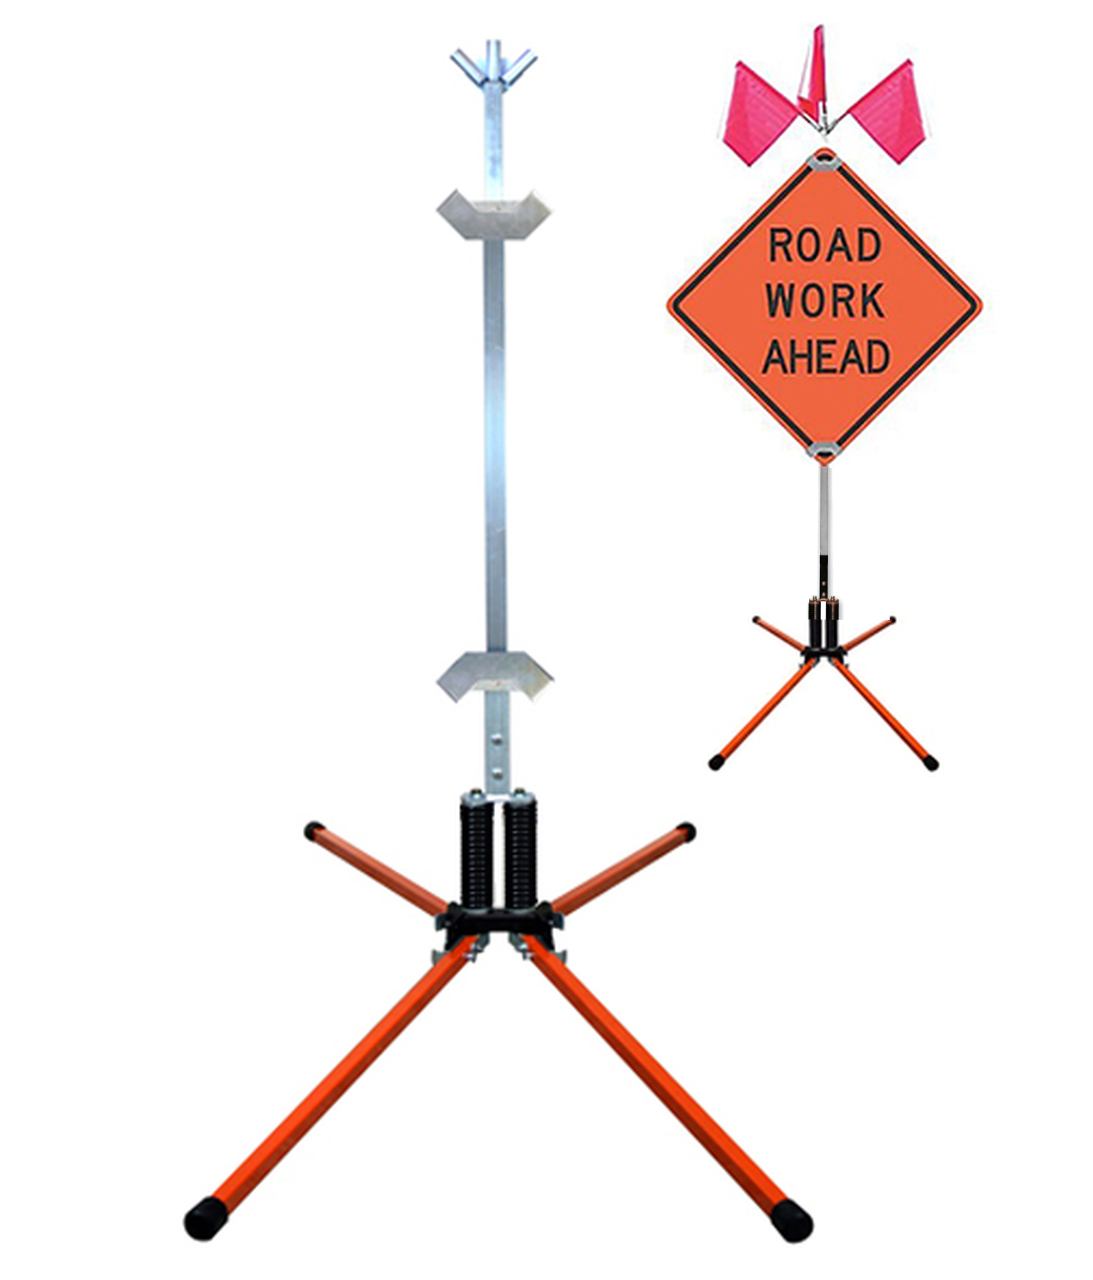 Portable Sign Stand: Dynaflex 3000 Sign Stand for Roll-Up Mesh Sign -  Conney Safety